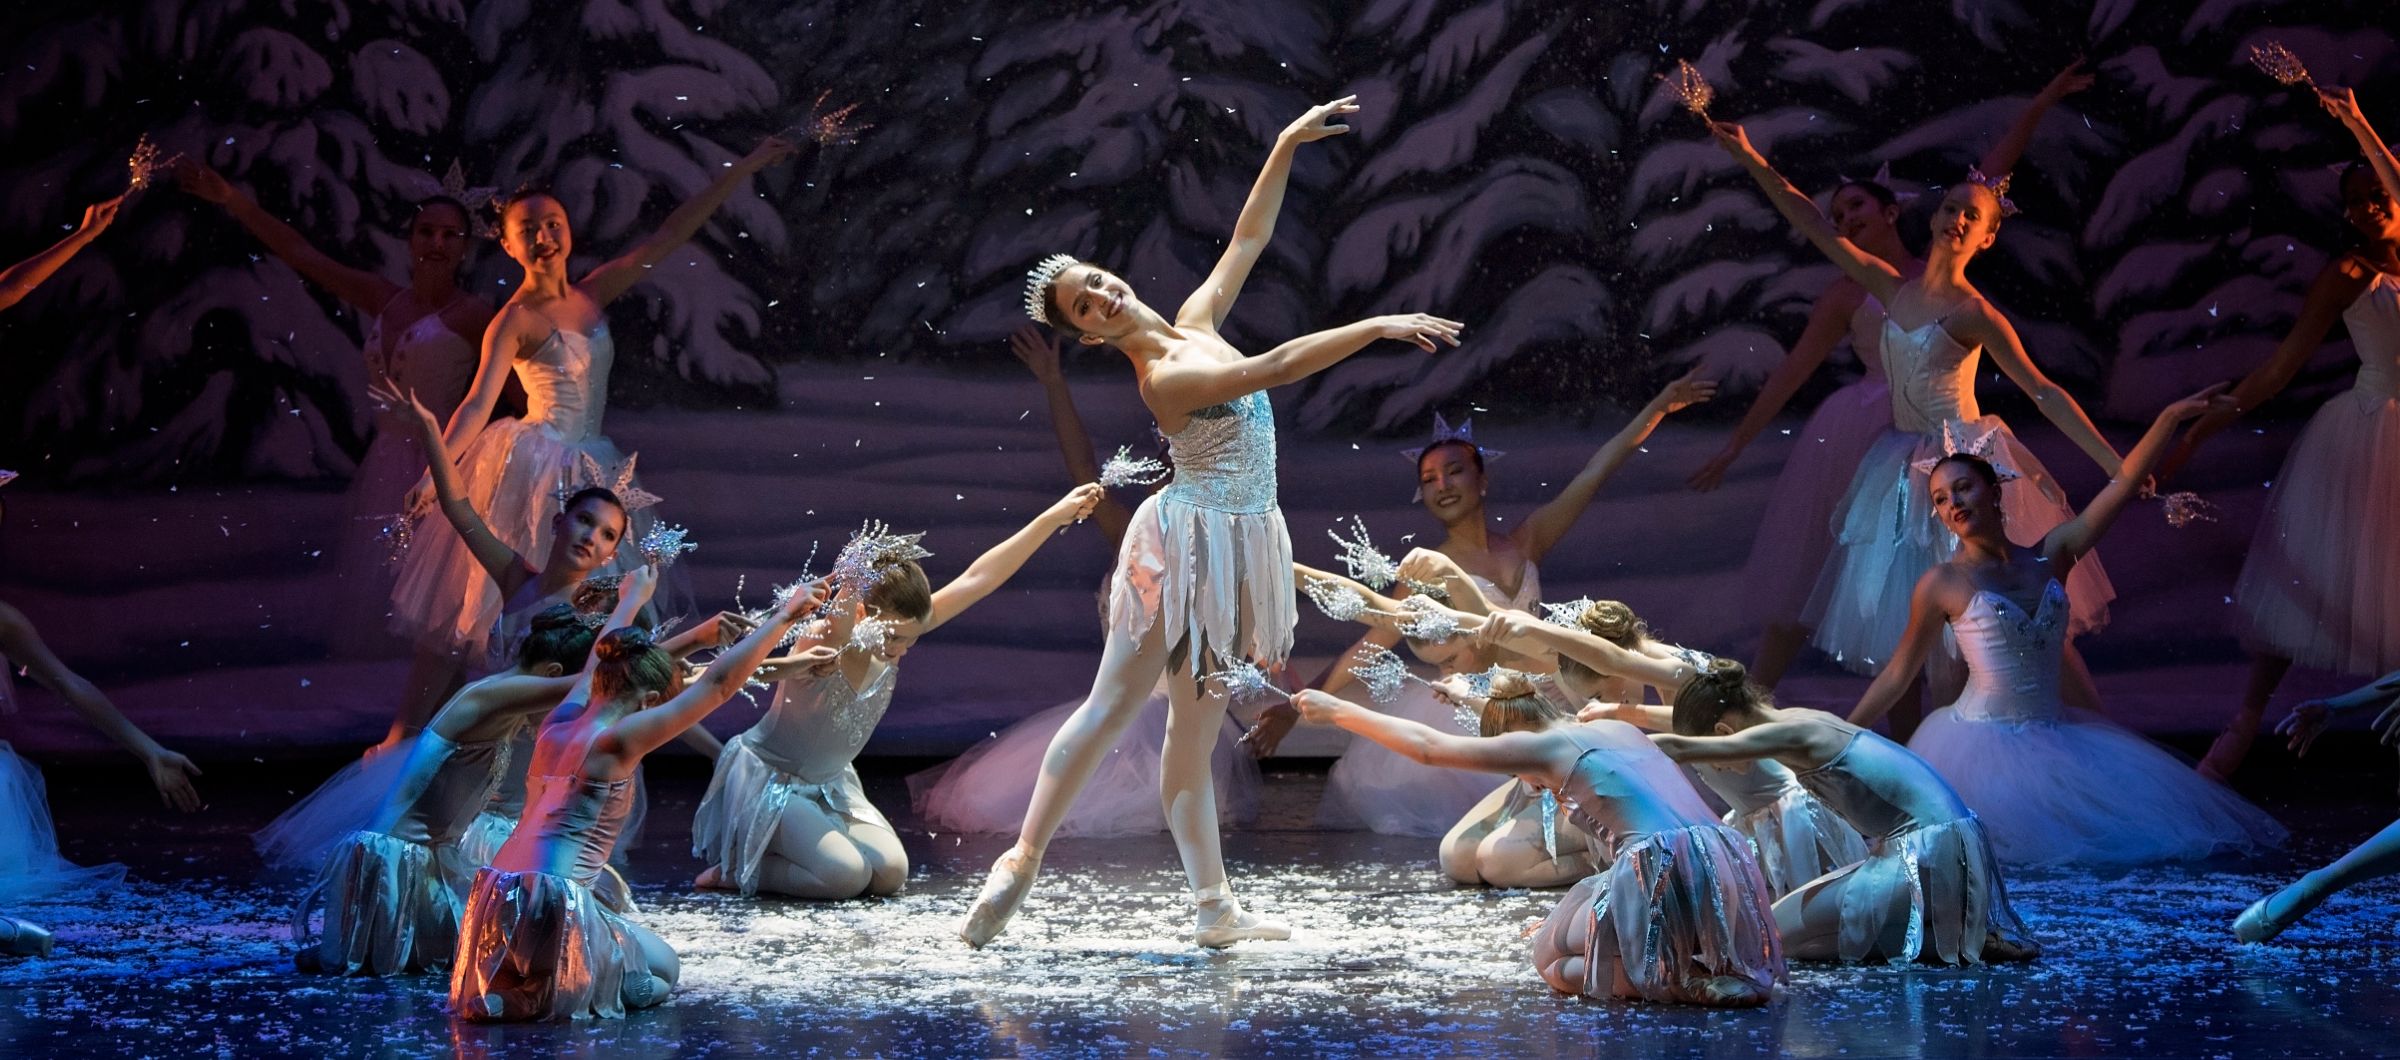 Coral Springs Center for the Arts Presents 'The Nutcracker'